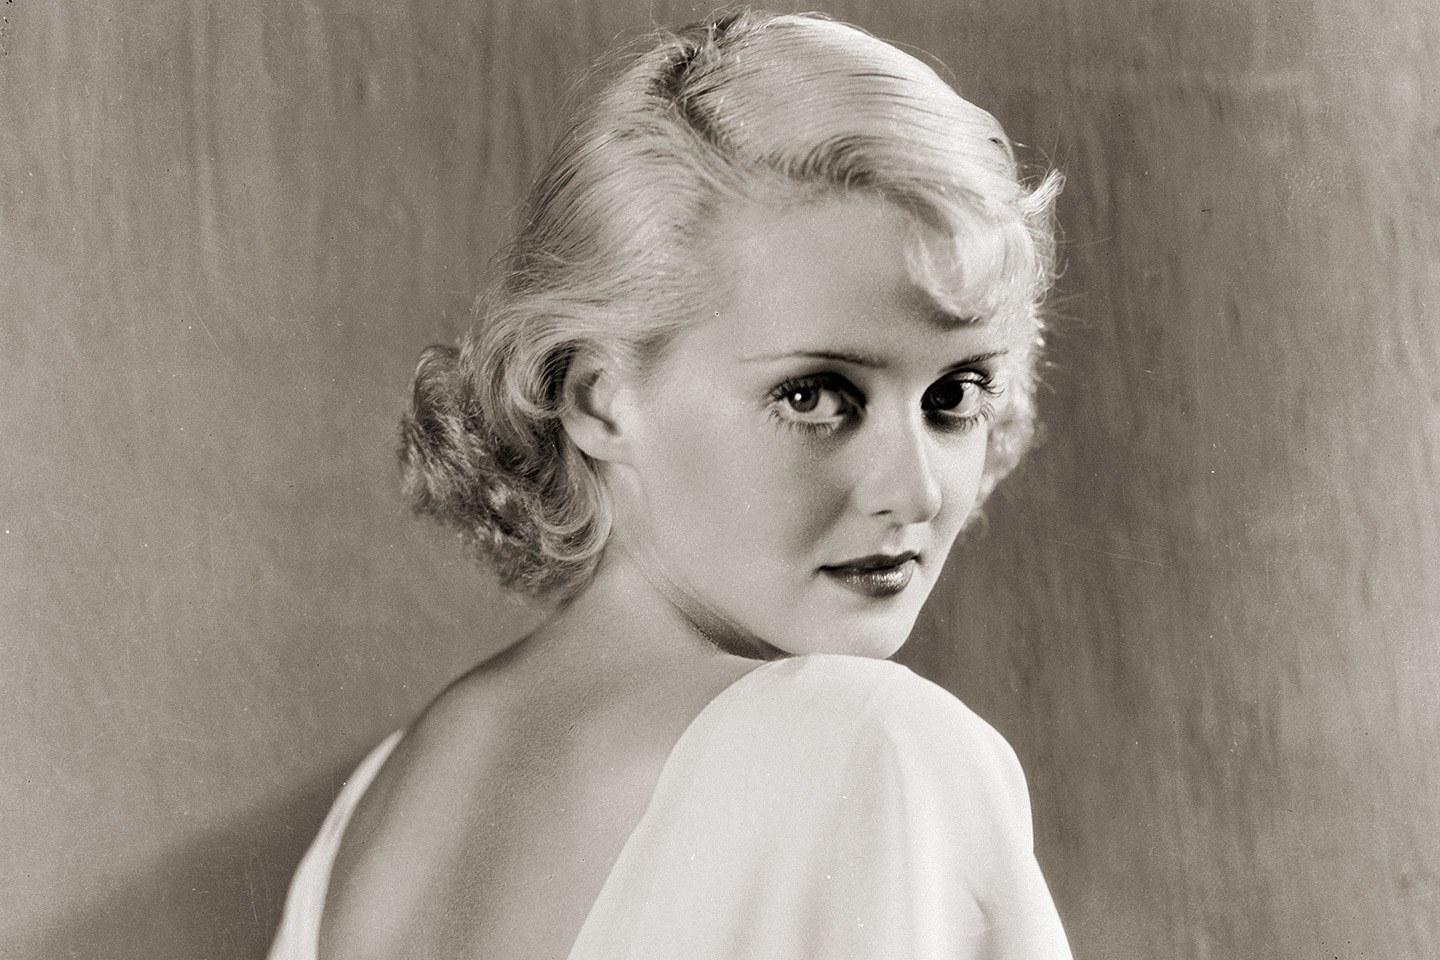 How Bette Davis Became a Hollywood Icon By Refusing to Conform at